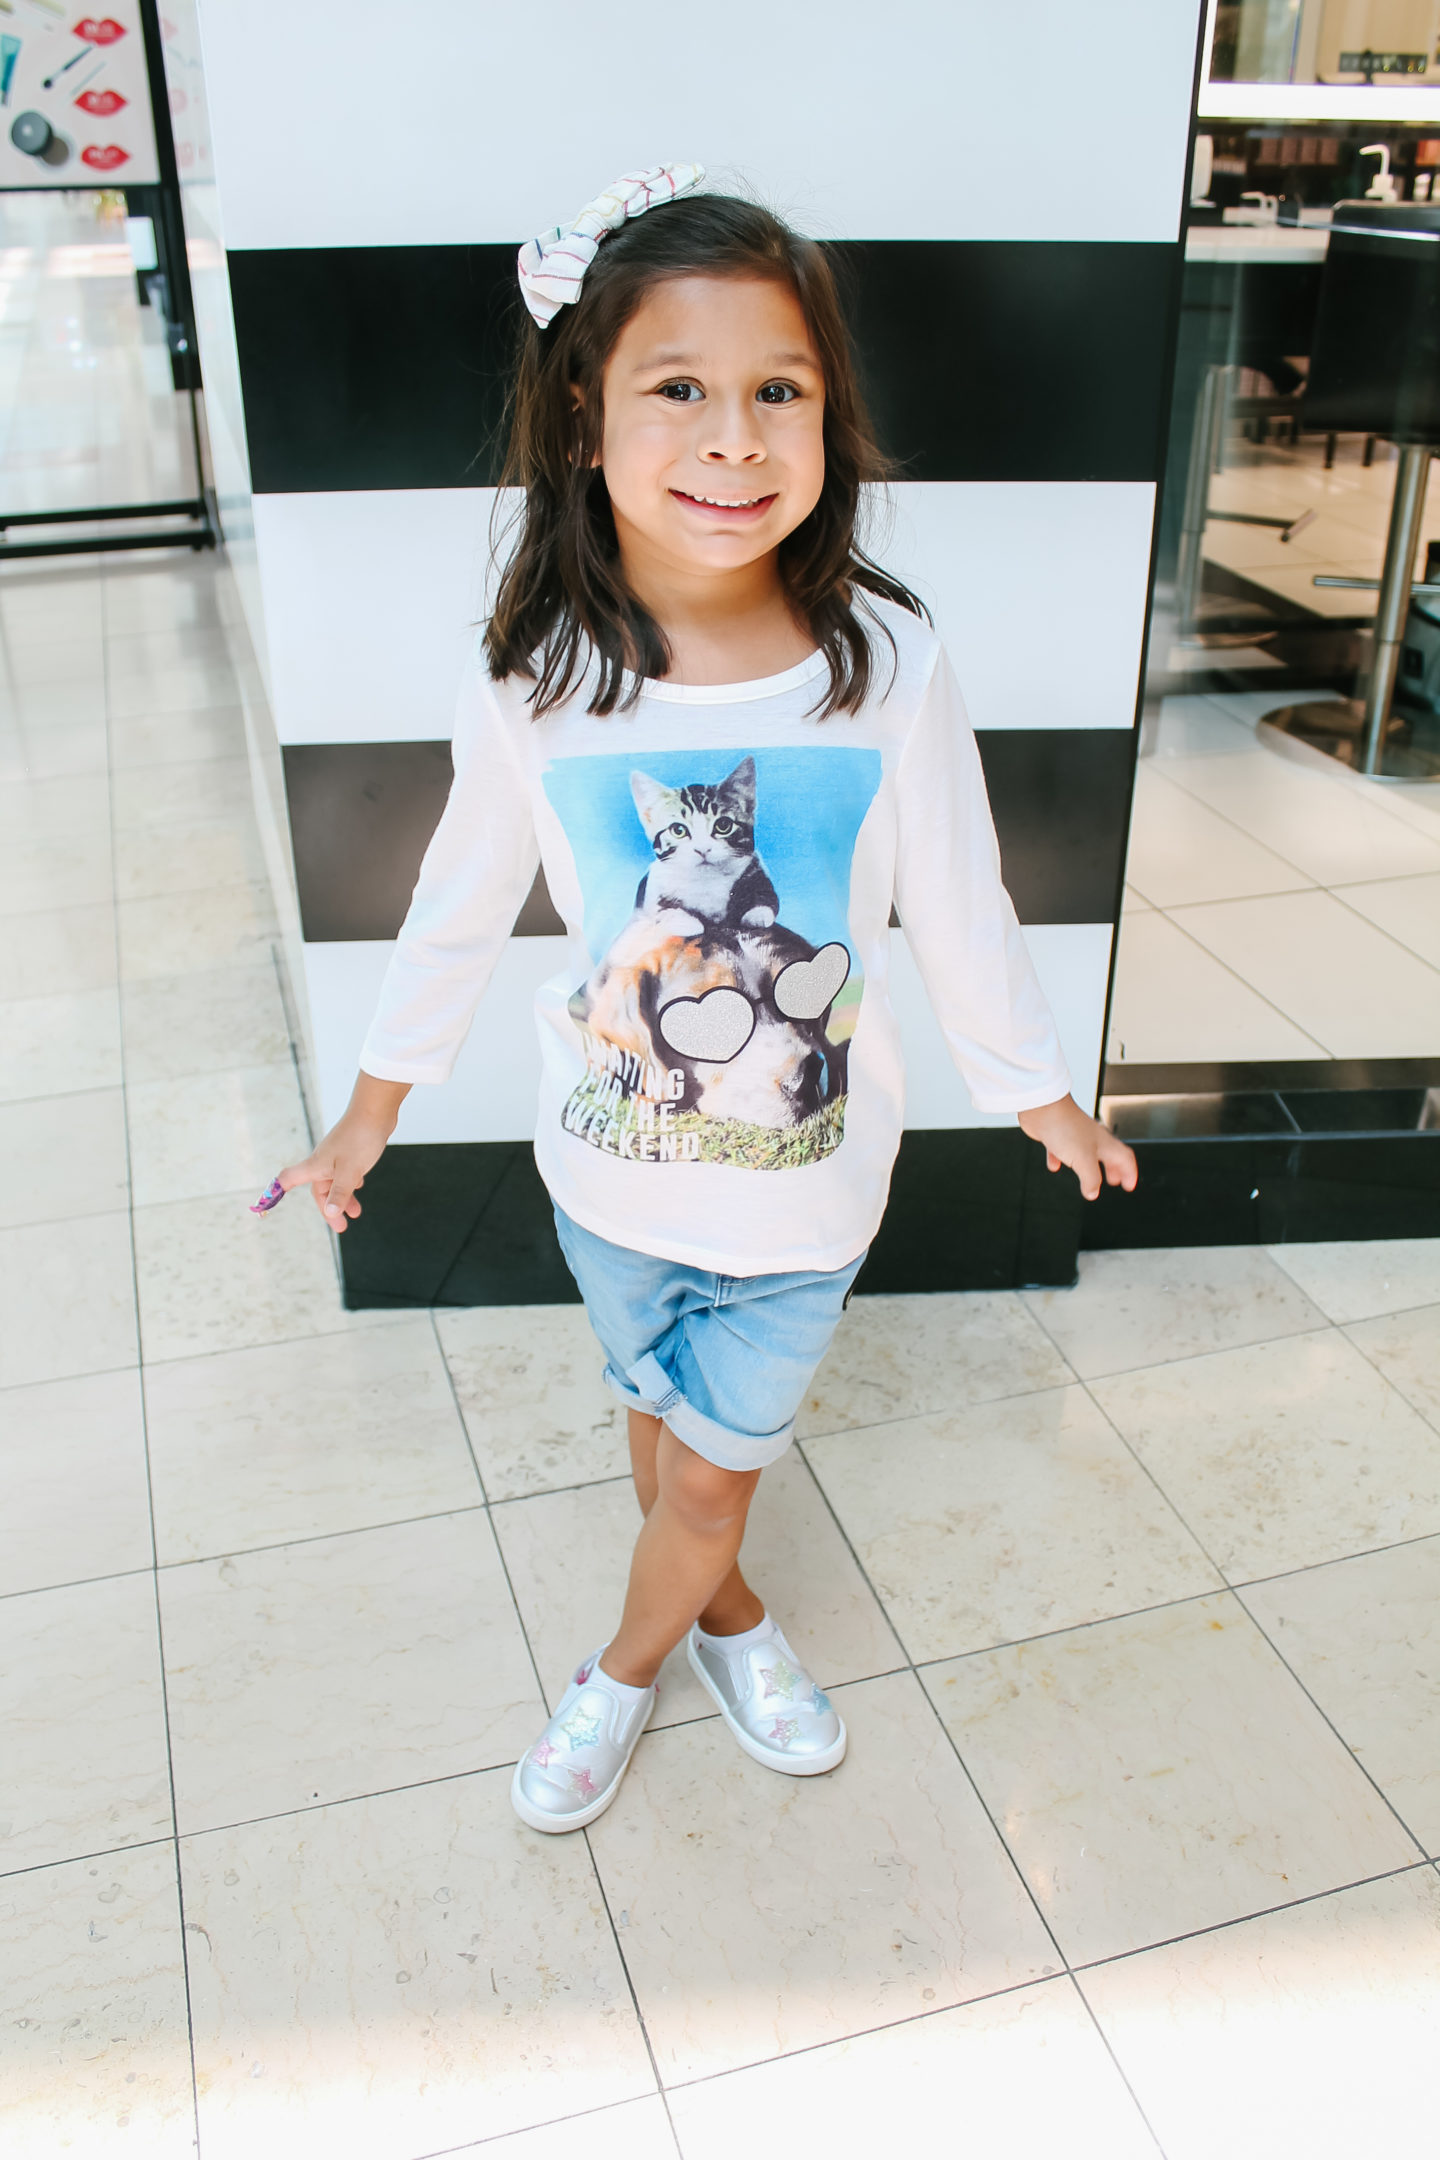 Back to school style with OshKosh B'gosh! Teaching kids how to be themselves!